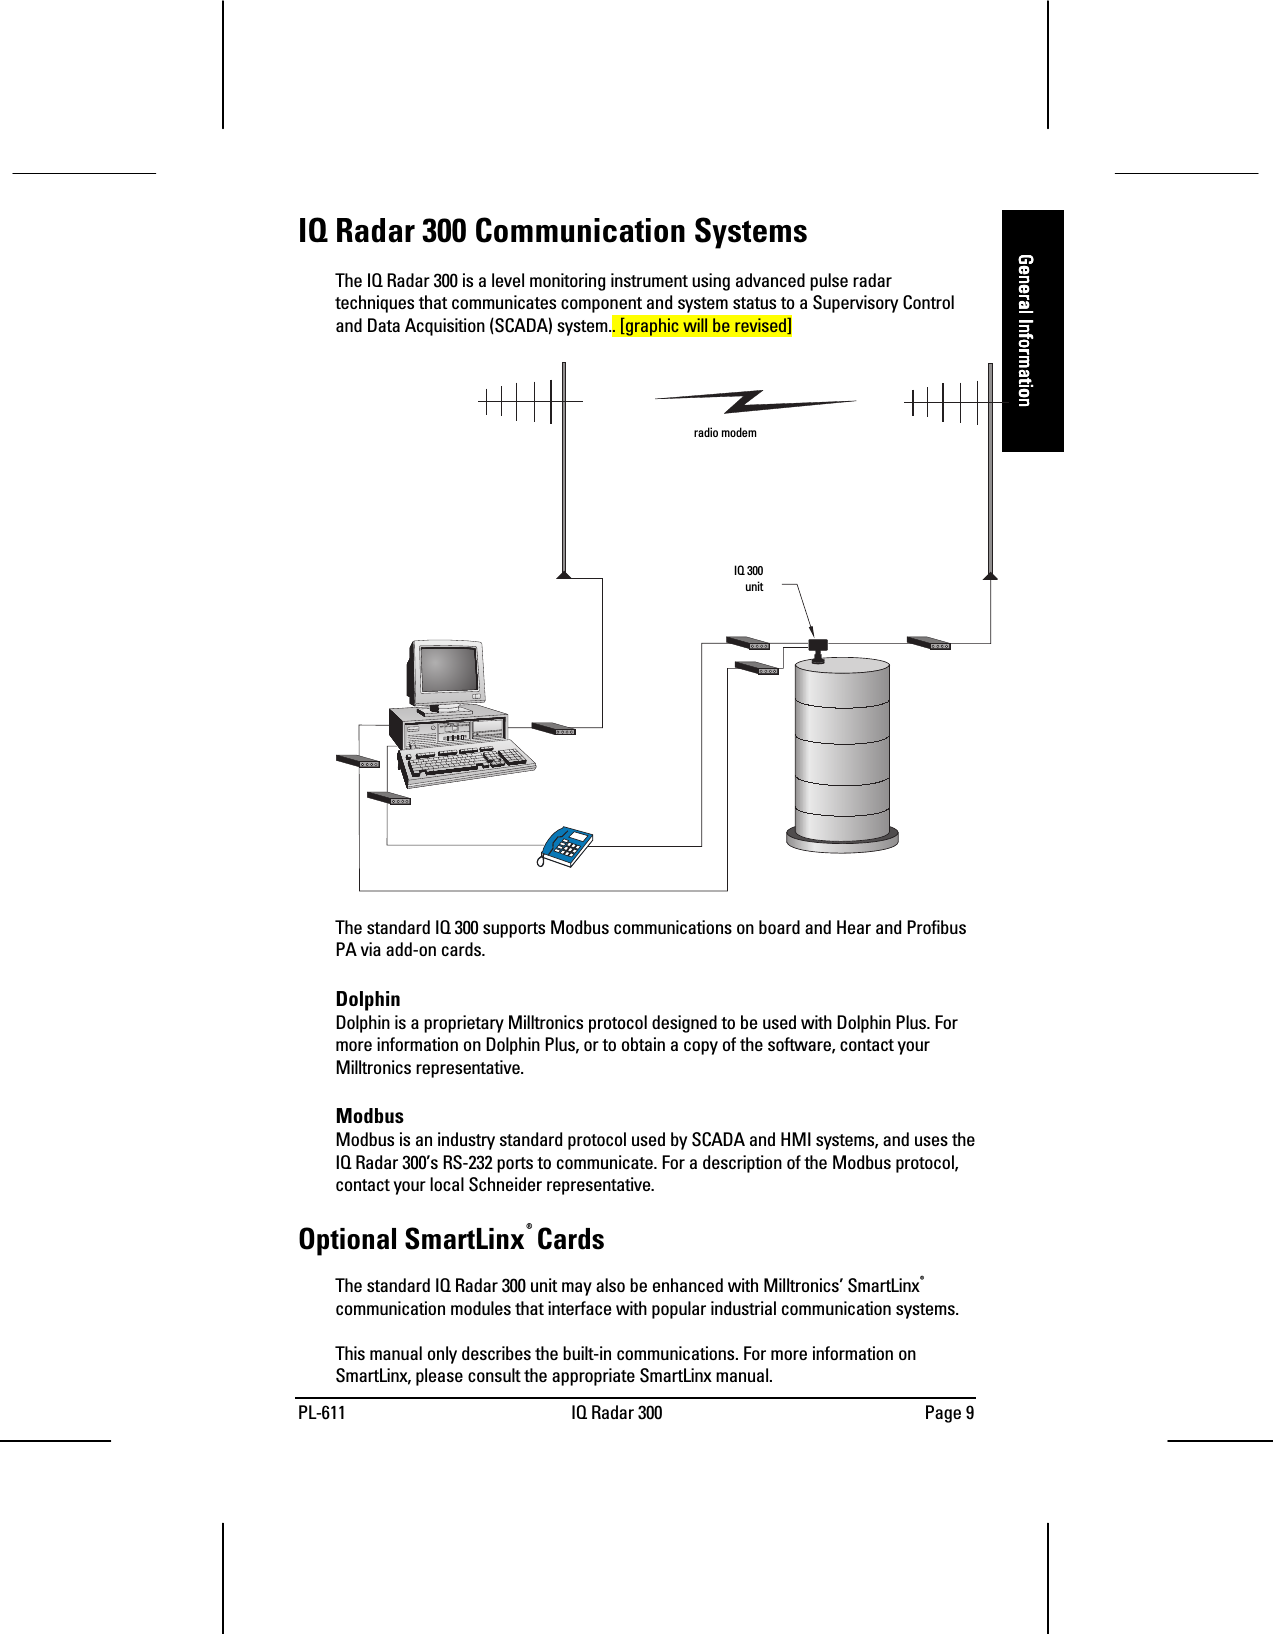 PL-611 IQ Radar 300 Page 9General InformationGeneral InformationGeneral InformationGeneral InformationIQ Radar 300 Communication SystemsThe IQ Radar 300 is a level monitoring instrument using advanced pulse radartechniques that communicates component and system status to a Supervisory Controland Data Acquisition (SCADA) system.. [graphic will be revised]The standard IQ 300 supports Modbus communications on board and Hear and ProfibusPA via add-on cards.DolphinDolphin is a proprietary Milltronics protocol designed to be used with Dolphin Plus. Formore information on Dolphin Plus, or to obtain a copy of the software, contact yourMilltronics representative.ModbusModbus is an industry standard protocol used by SCADA and HMI systems, and uses theIQ Radar 300’s RS-232 ports to communicate. For a description of the Modbus protocol,contact your local Schneider representative.Optional SmartLinx®CardsThe standard IQ Radar 300 unit may also be enhanced with Milltronics’ SmartLinx®communication modules that interface with popular industrial communication systems.This manual only describes the built-in communications. For more information onSmartLinx, please consult the appropriate SmartLinx manual.radio modemIQ 300 unit